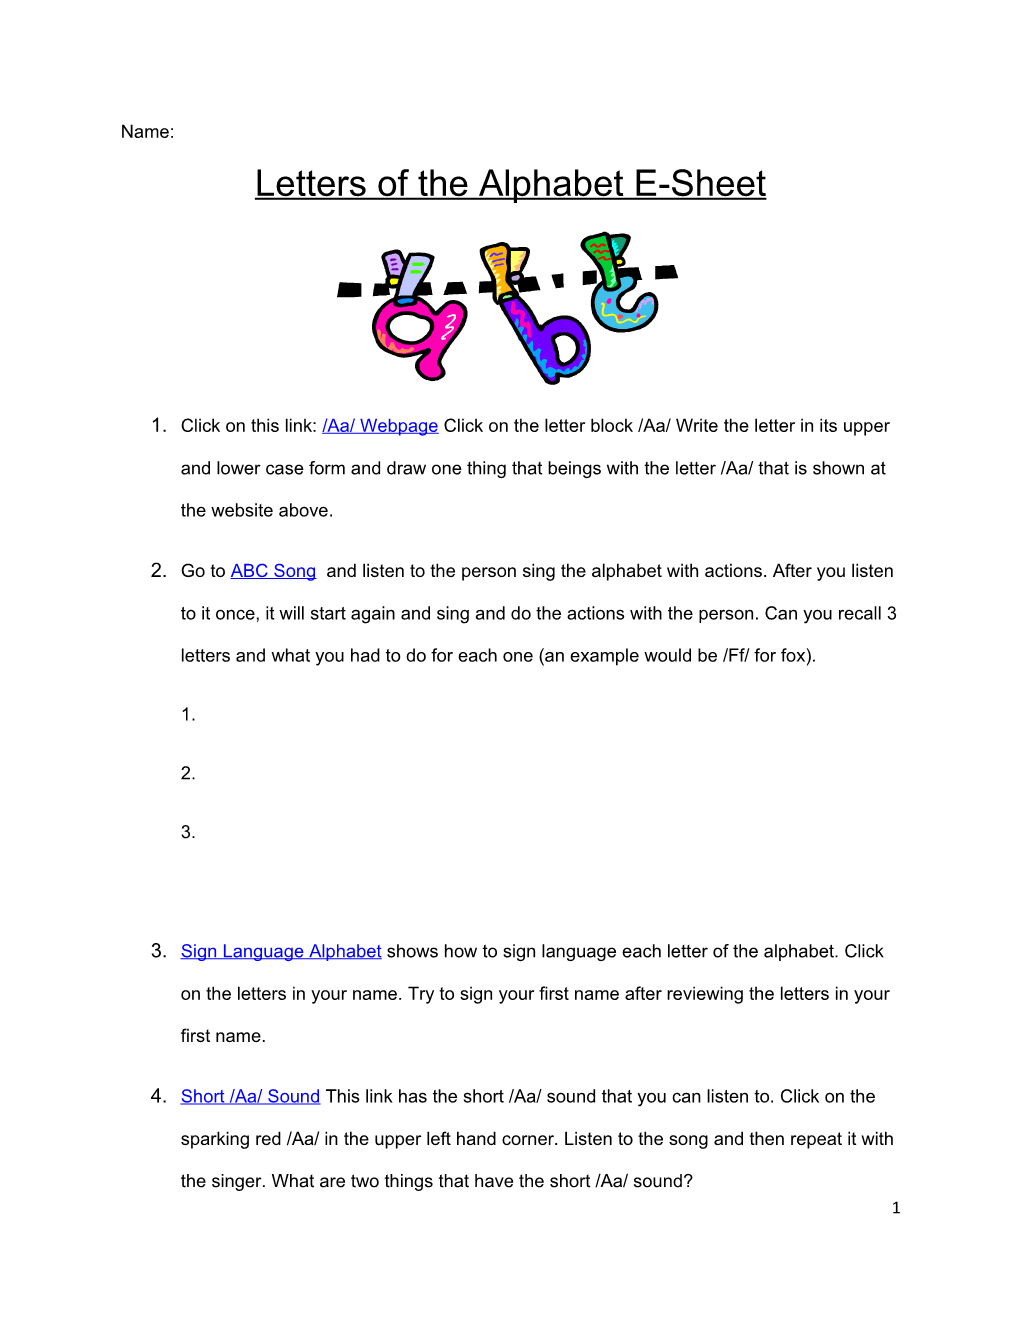 Letters of the Alphabet E-Sheet